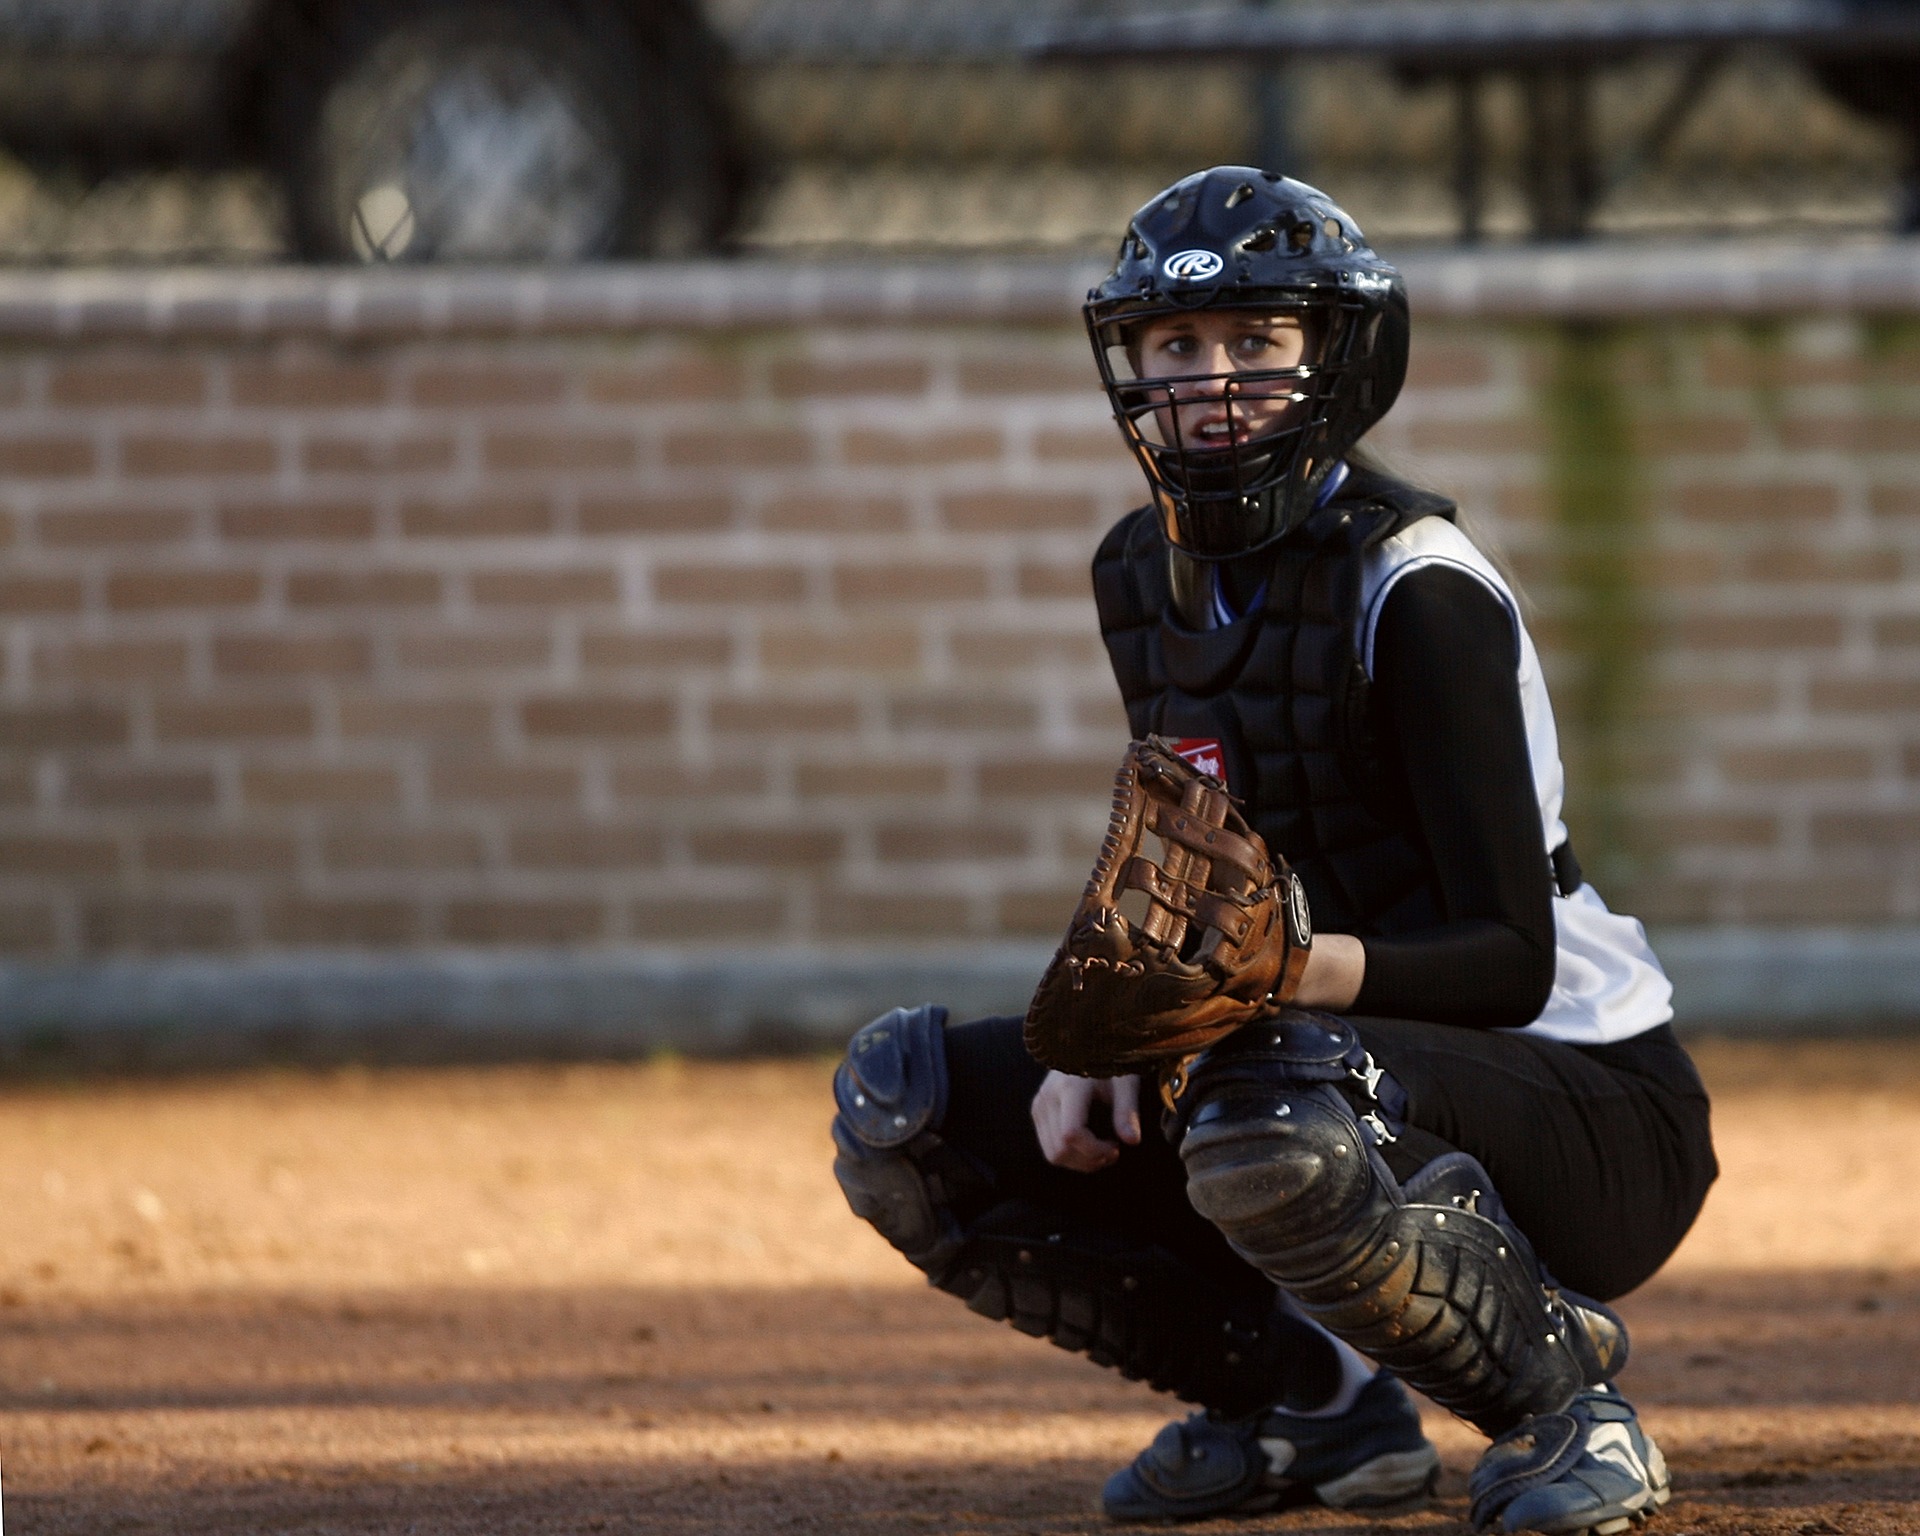 best softball cleats for catchers